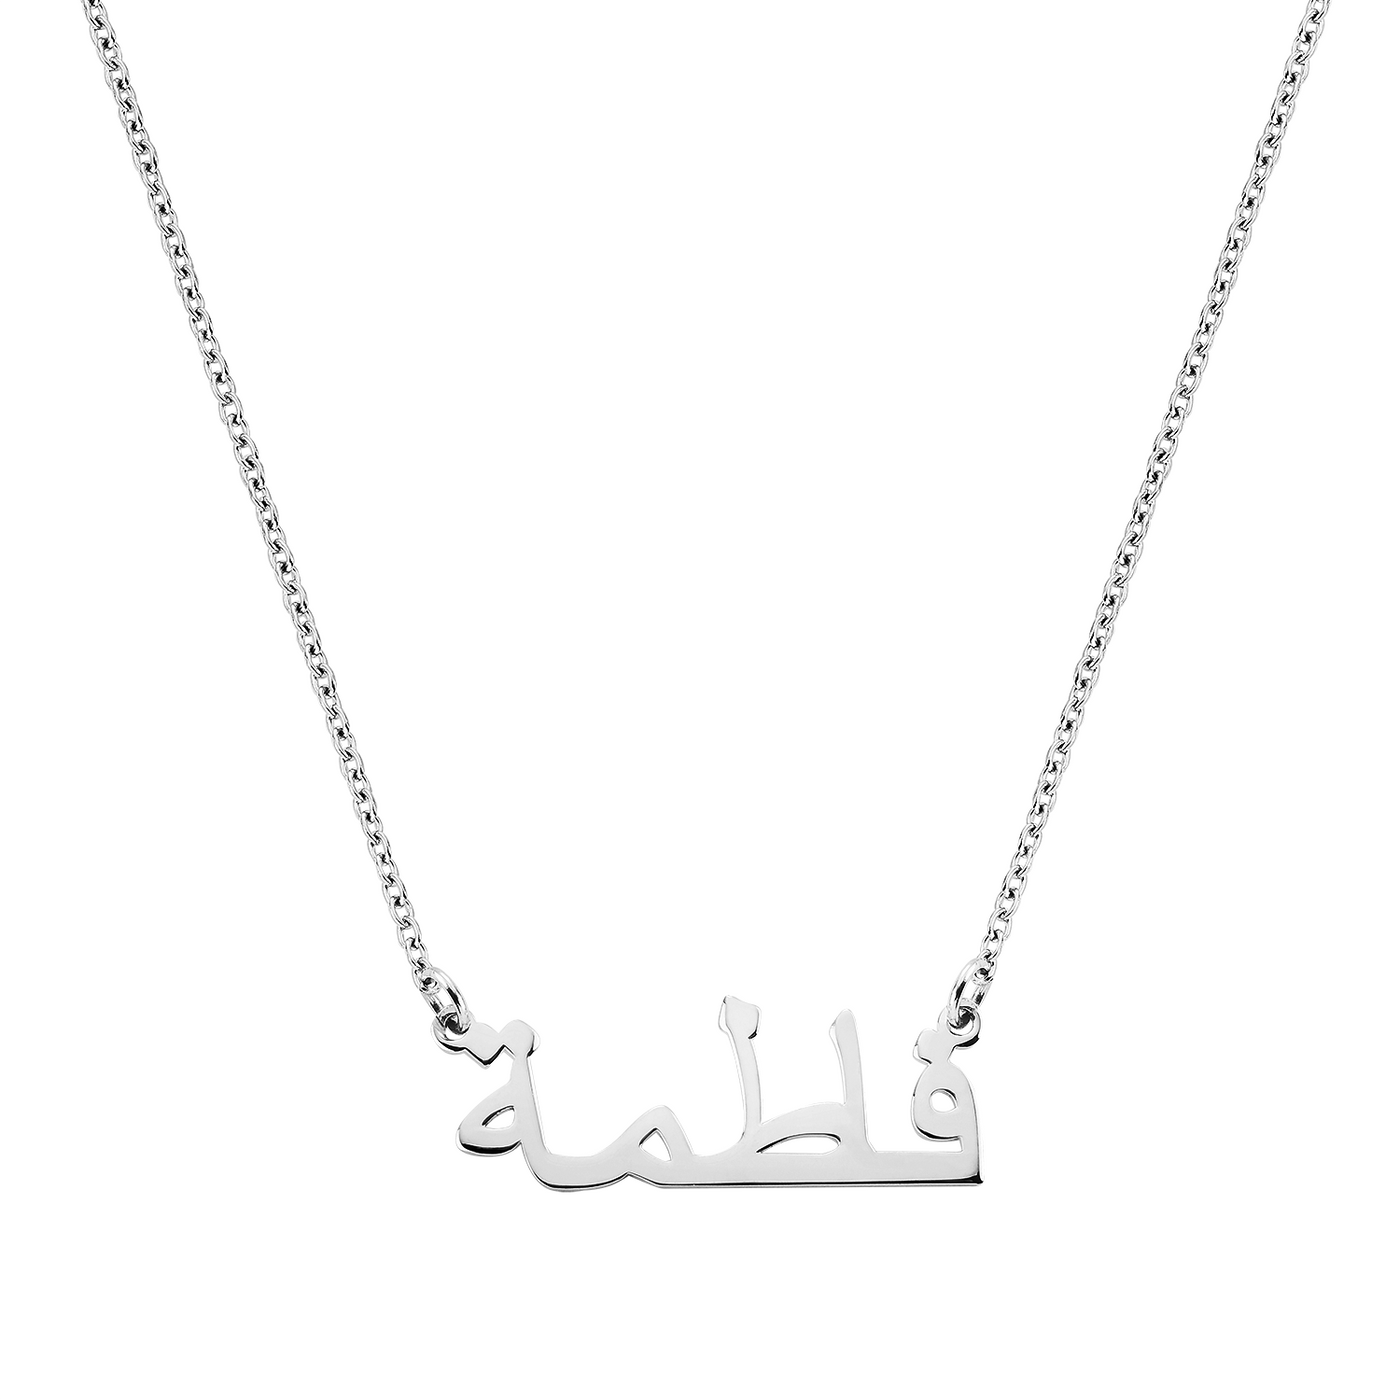 Name necklace - Arabic variant